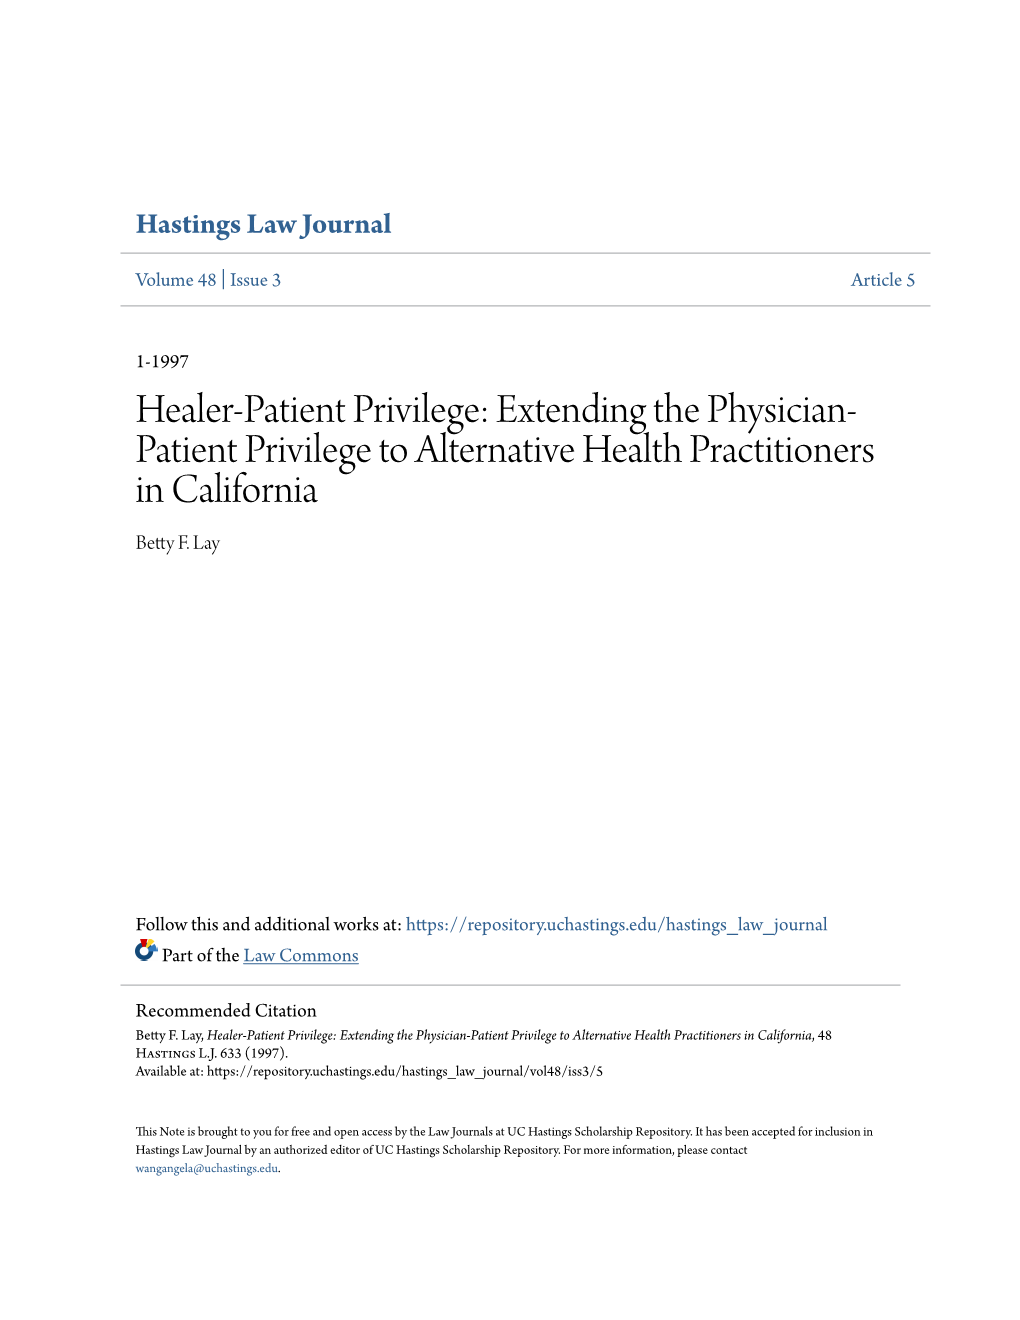 Extending the Physician-Patient Privilege to Alternative Health Practitioners in California, 48 Hastings L.J